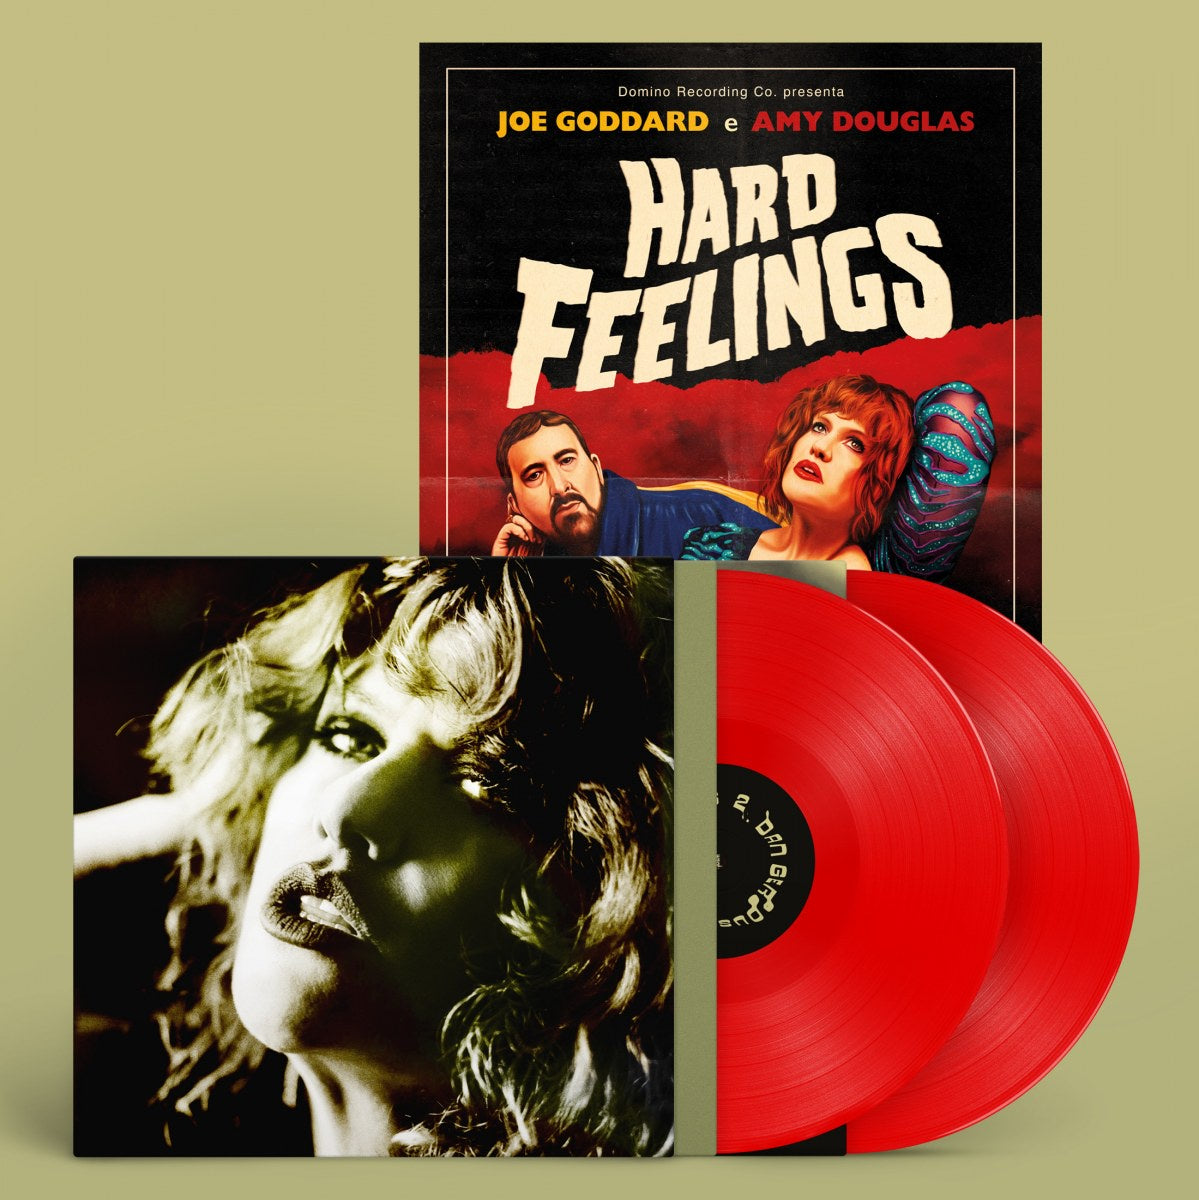 HARD FEELINGS - HARD FEELINGS - New Limited Edition 2 LP Record 2021 Domino Blood Red Vinyl - Synthpop / Dance Pop